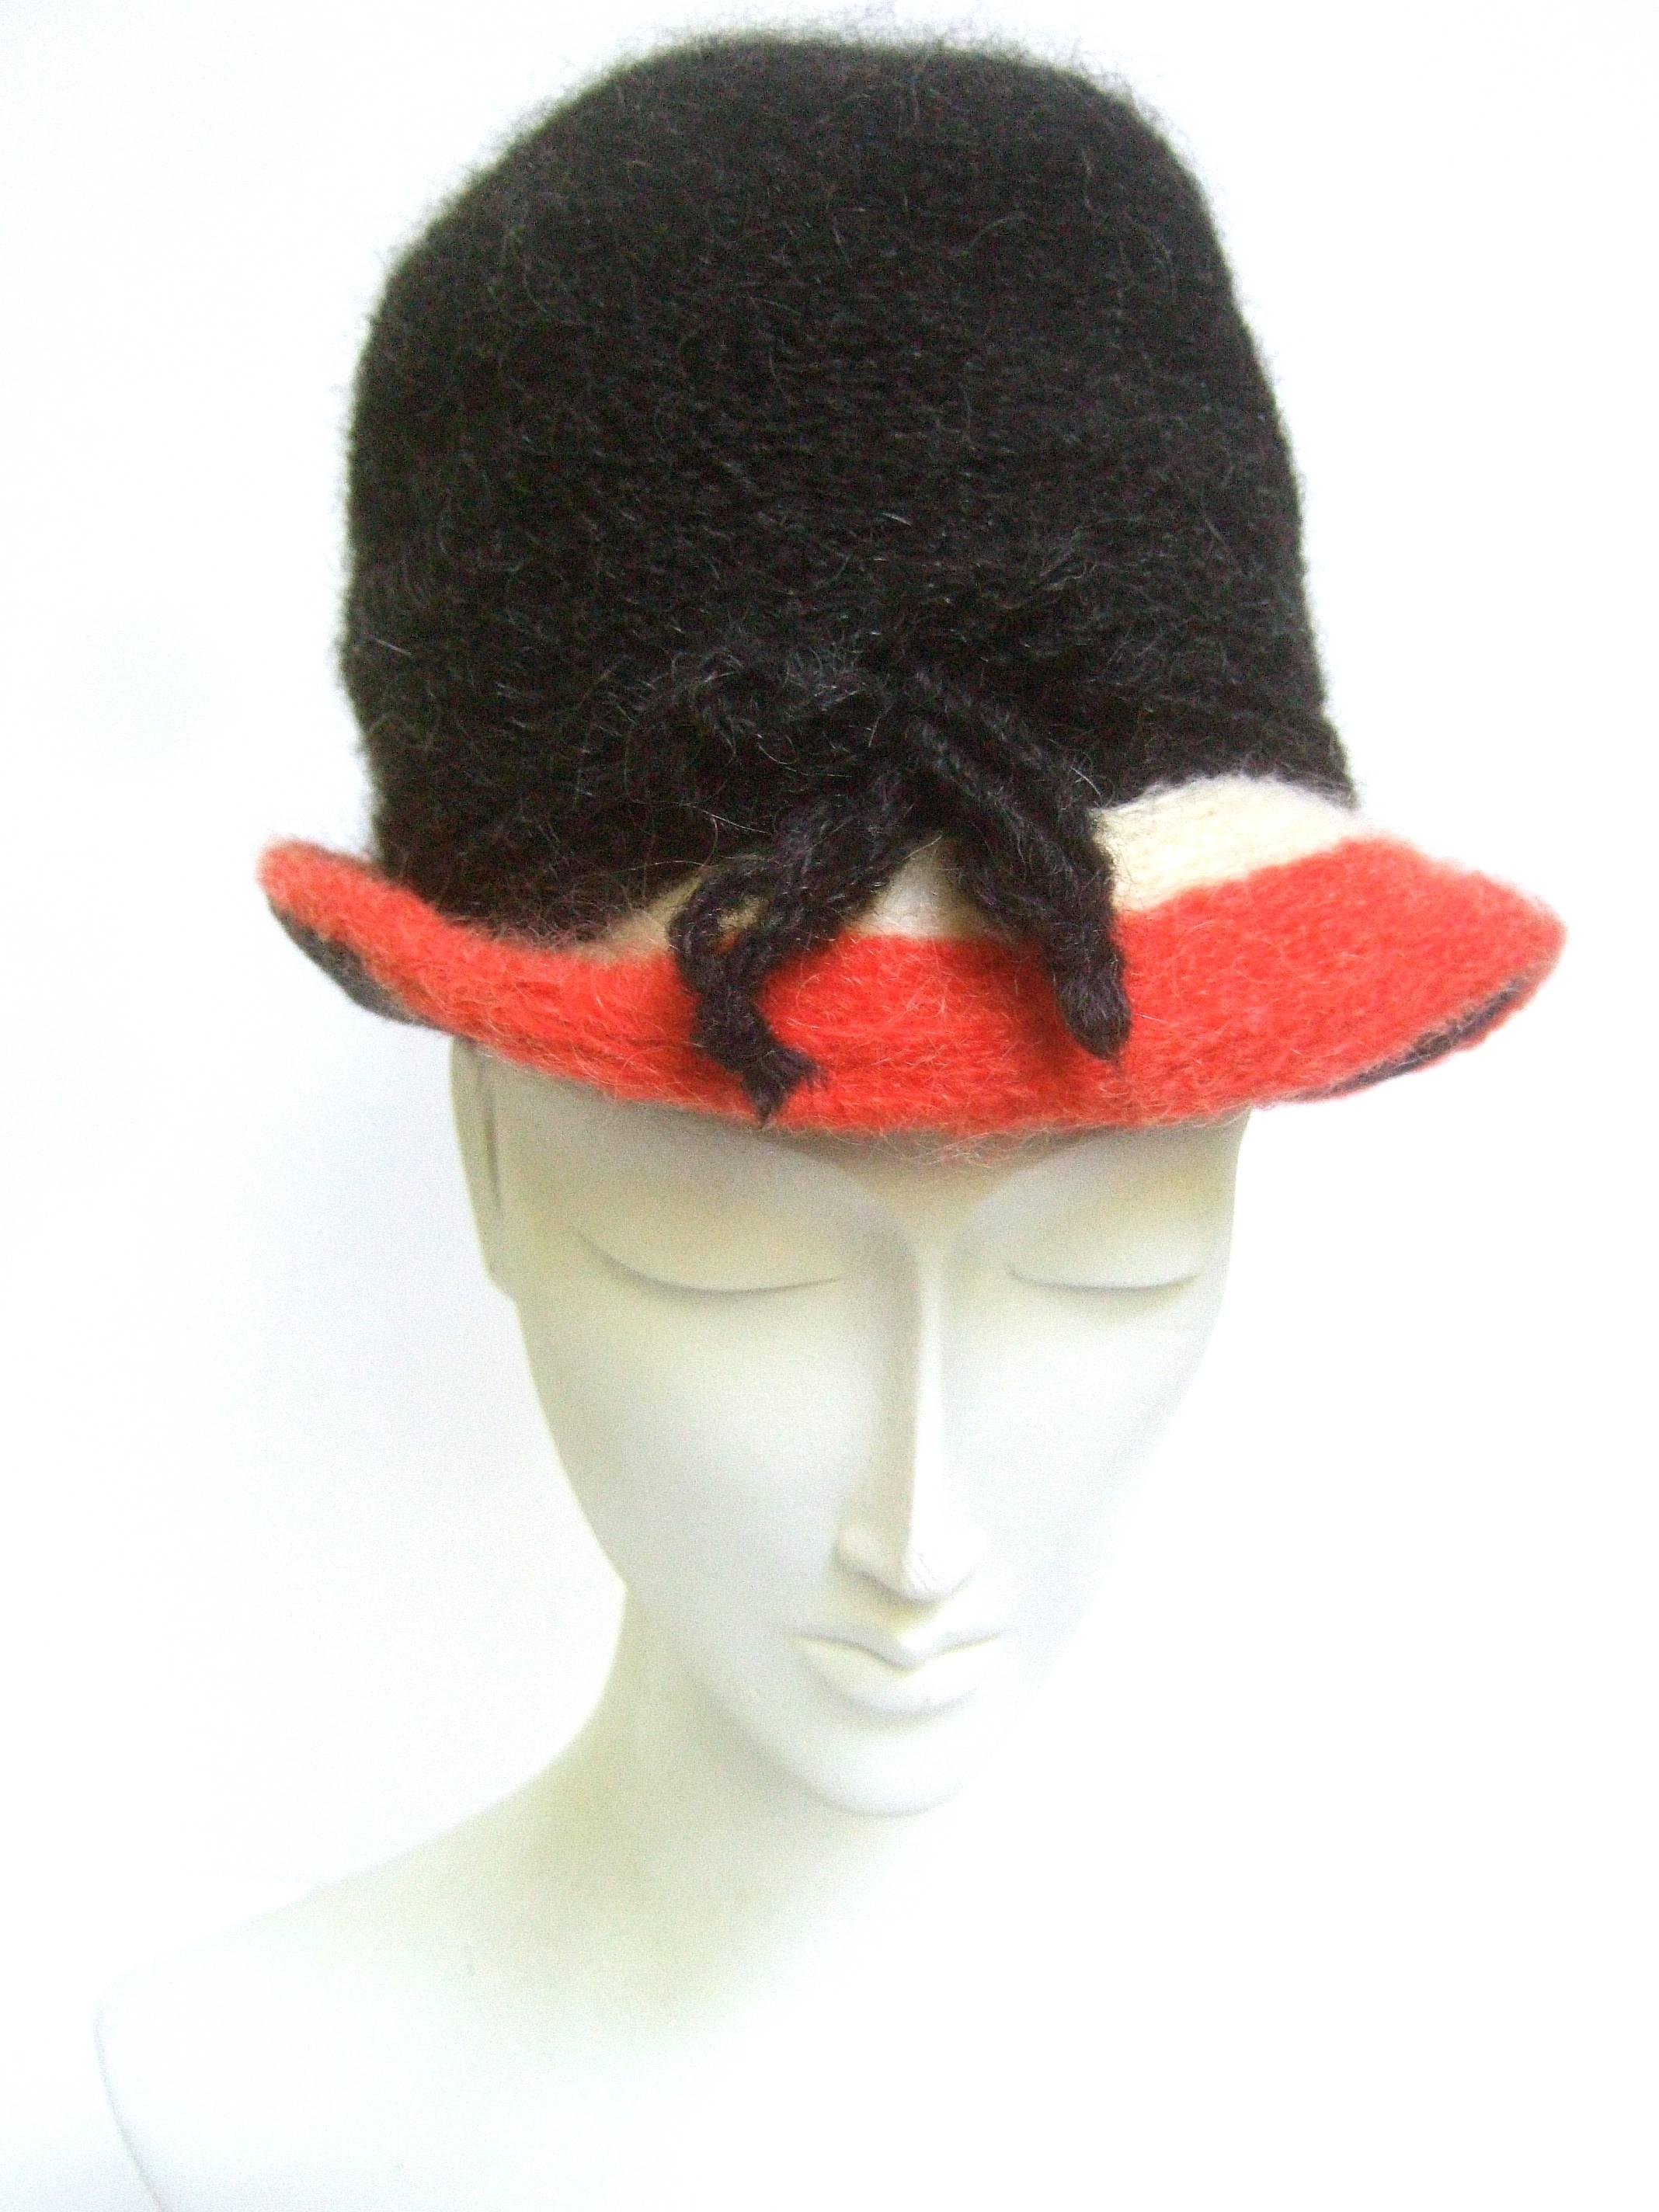 Yves Saint Laurent Stylish wool knit hat c 1970
The chic designer hat is constructed with 
color block fuzzy wool knit bands

The fuzzy gray / black wool crown is accented
with wool knit striped bands of ivory & red

Makes a very striking